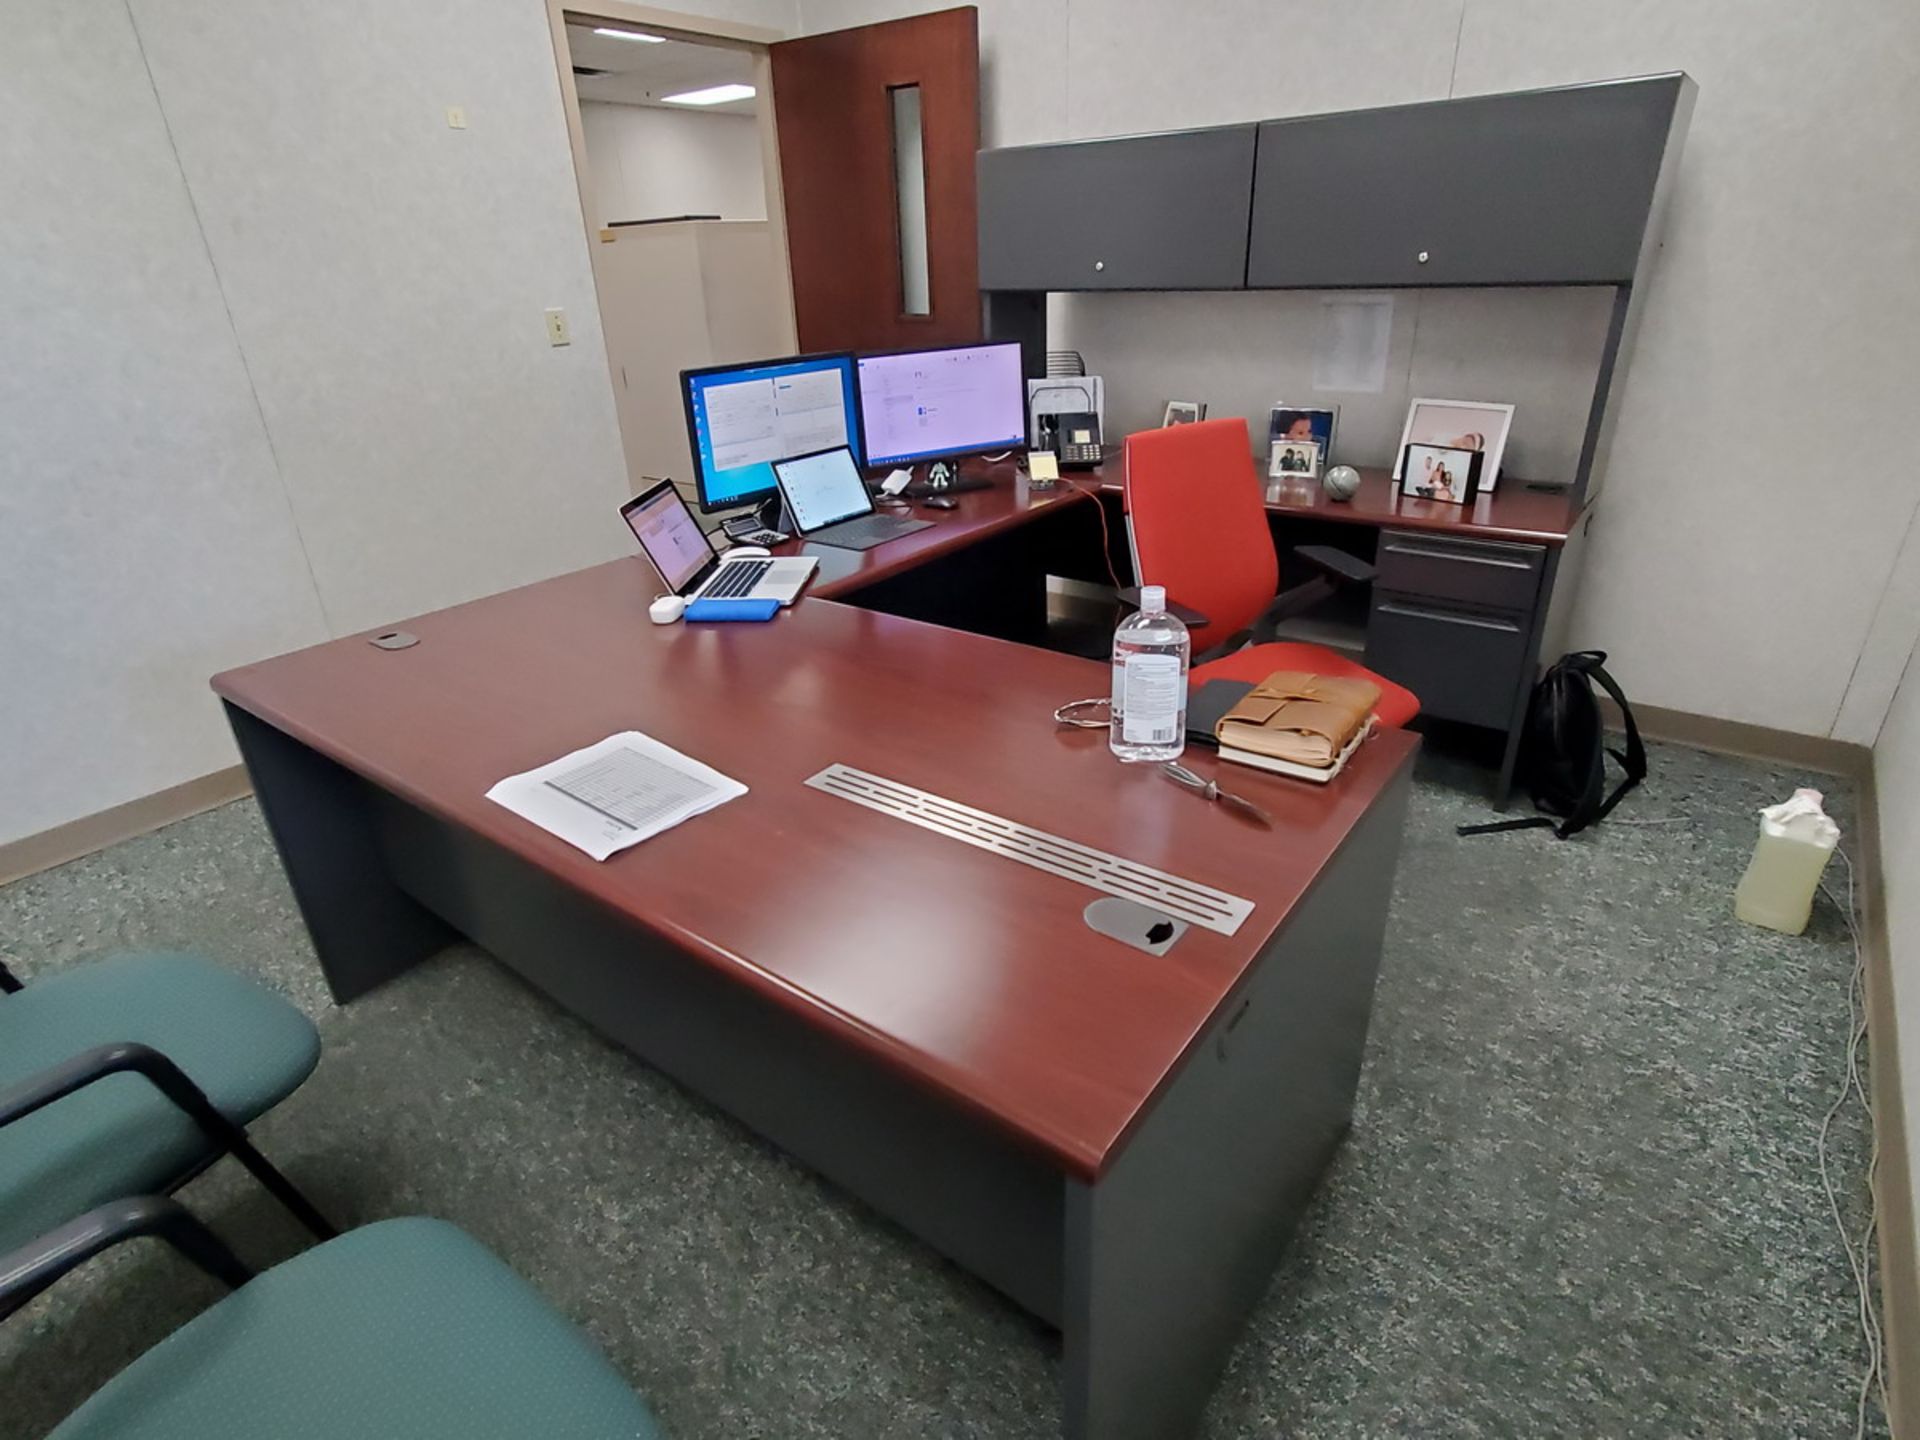 Office Furniture (1) U-Shape Wood Desk, W/ 4-Drawers; (2) Chairs (Red Executive Chair Excluded) - Image 2 of 4